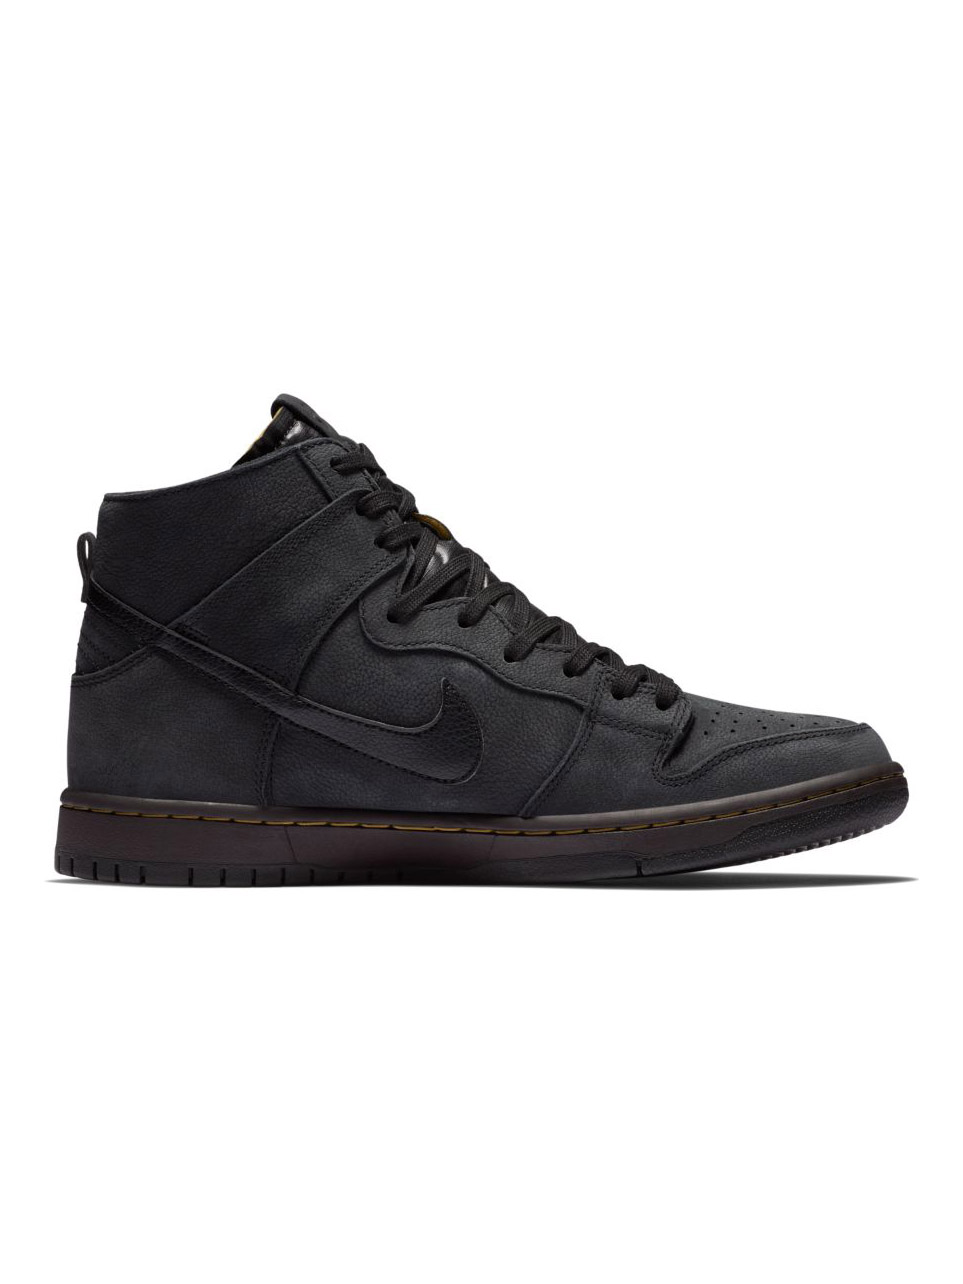 nike sb zoom dunk high pro deconstructed premium shoes